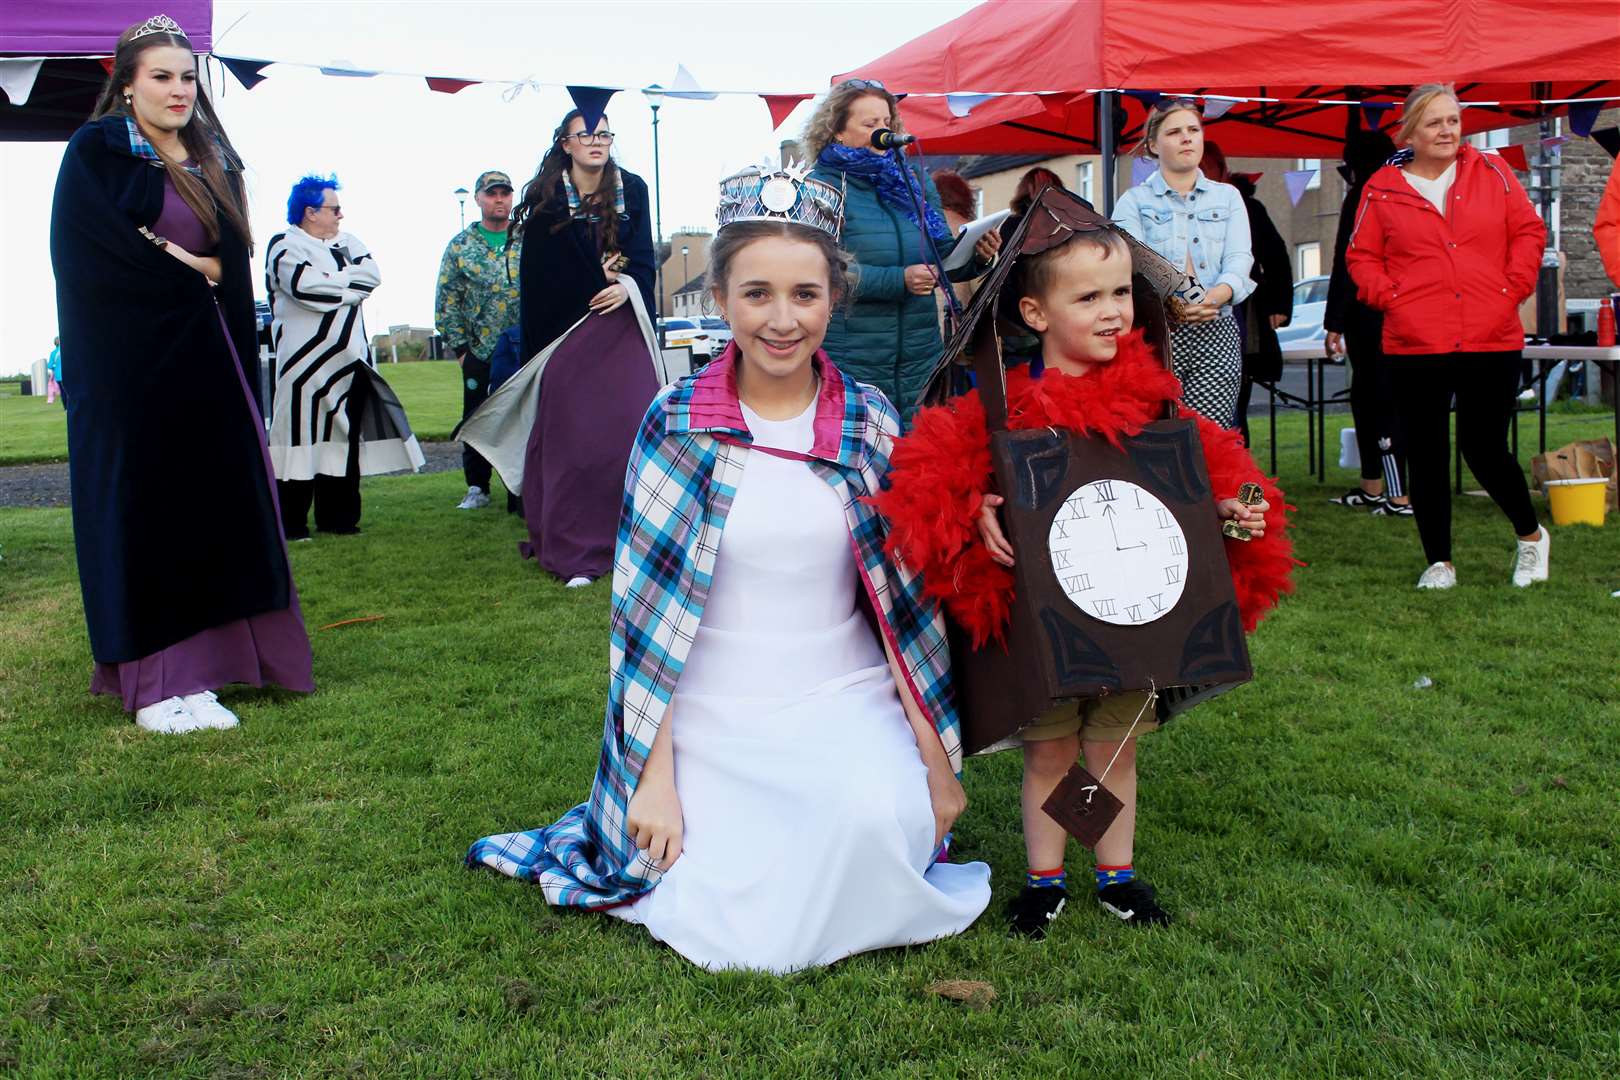 Gala queen Abby Dunbar with Oliver Nicolson (3) in his cuckoo clock costume. Picture: Alan Hendry